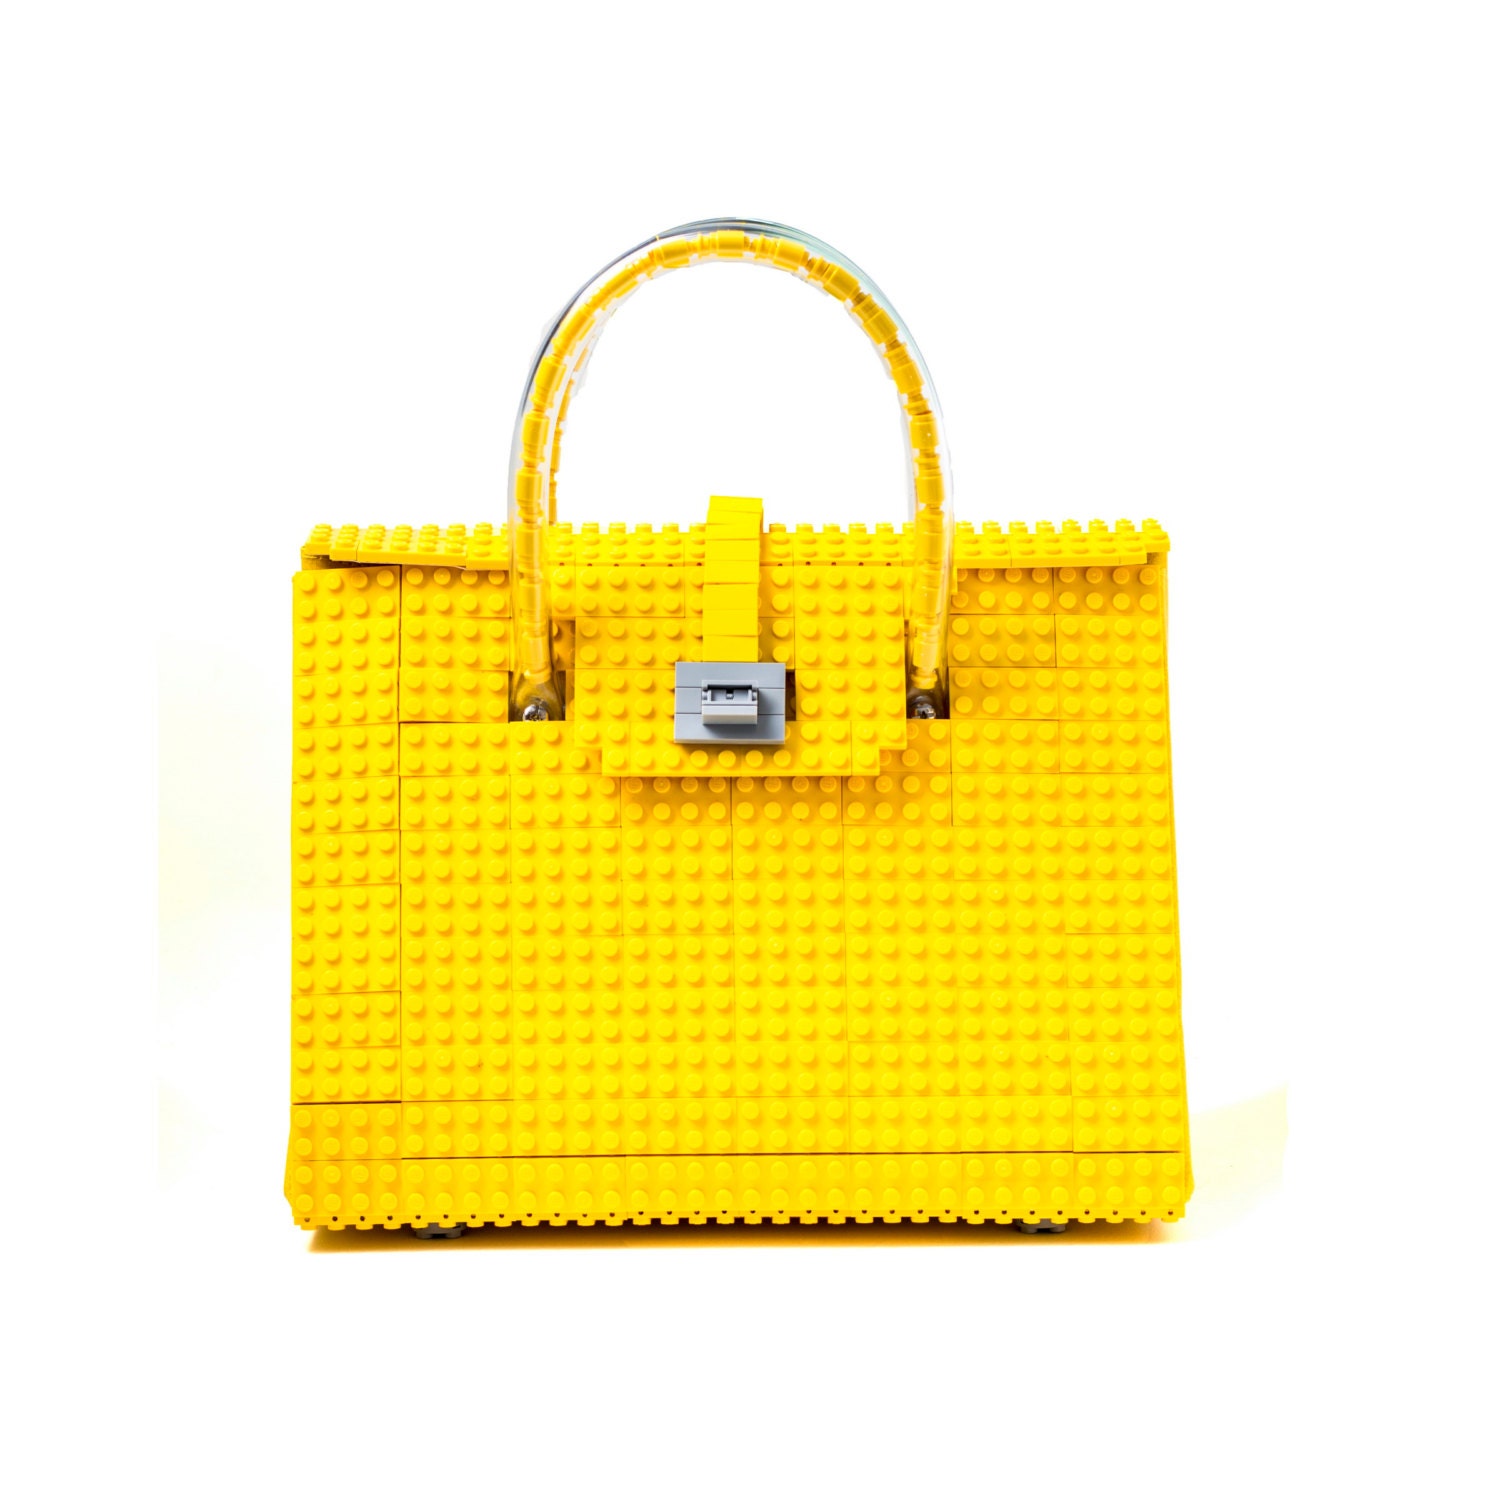 Jeg vil have Mona Lisa Bore The Brick Bag in Yellow Made Entirely of LEGO® Bricks FREE - Etsy